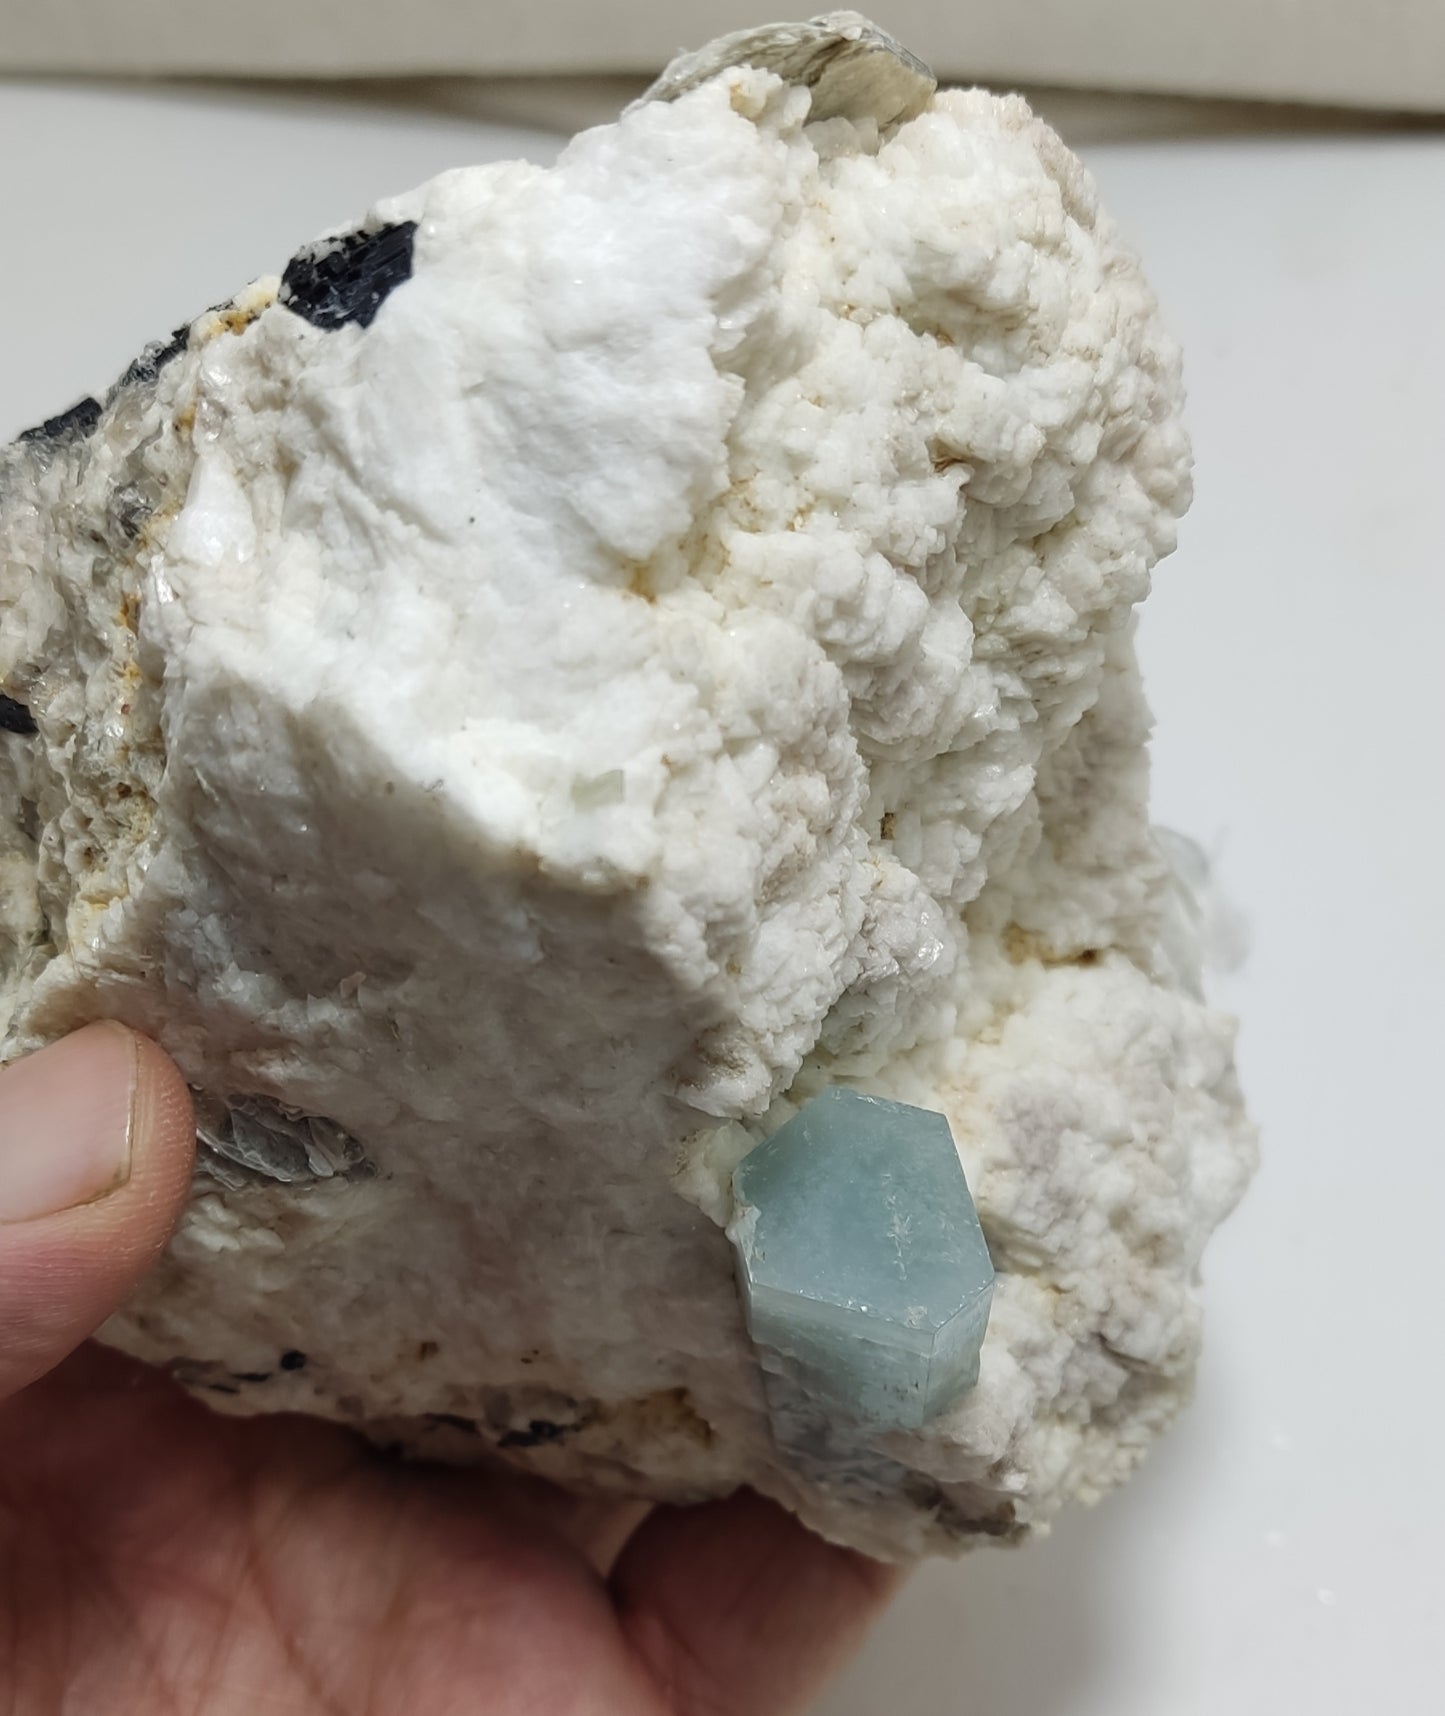 An aesthetic Specimen of Afghanistan Aquamarine with mica and Schorl 1070 grams